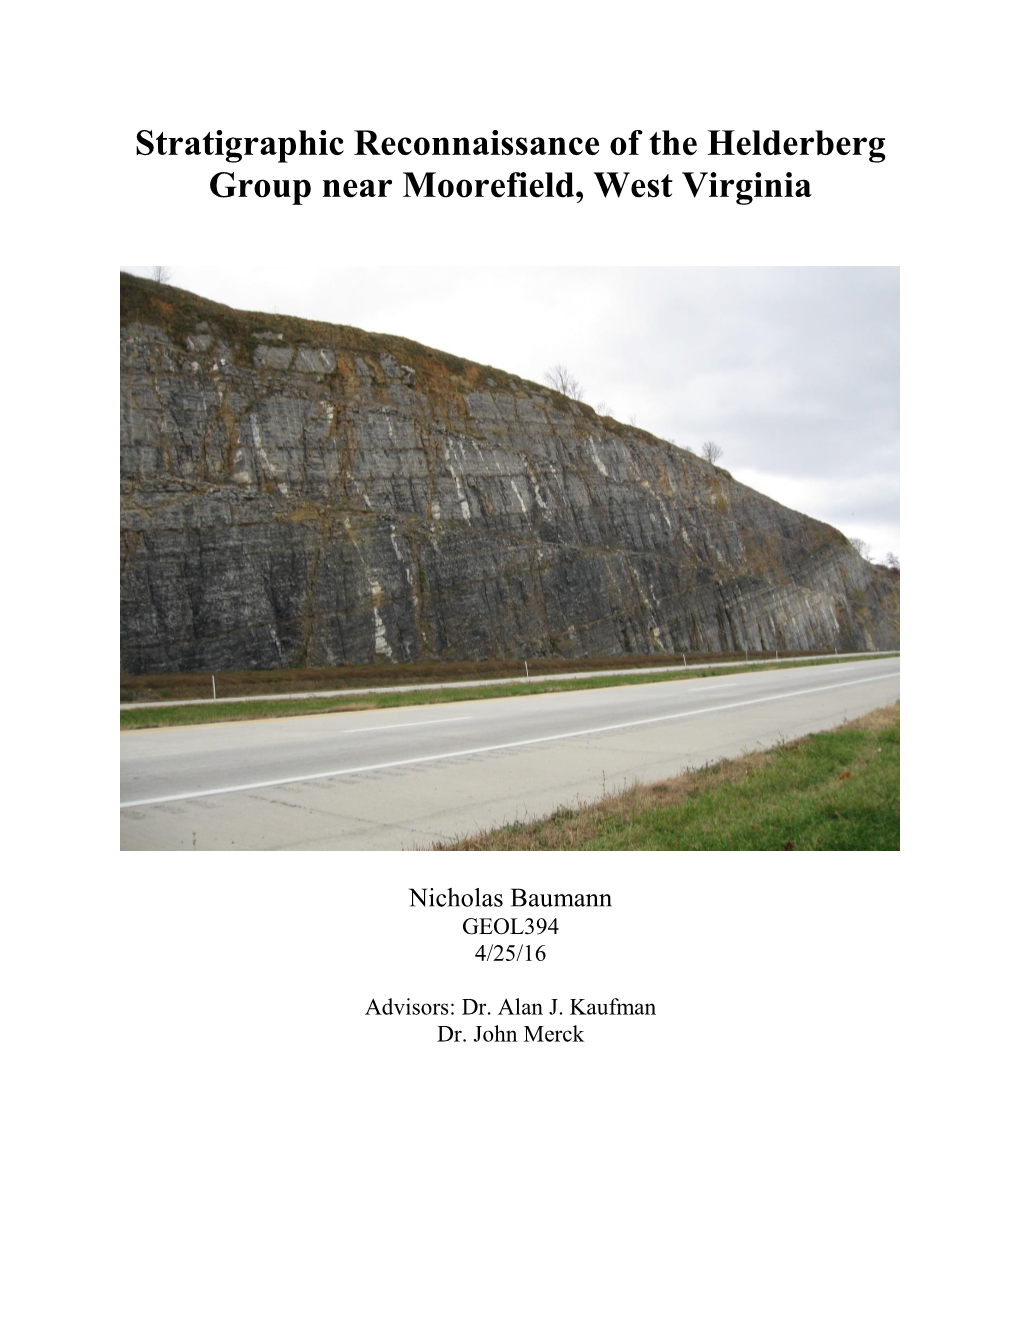 Stratigraphic Reconnaissance of the Helderberg Group Near Moorefield, West Virginia